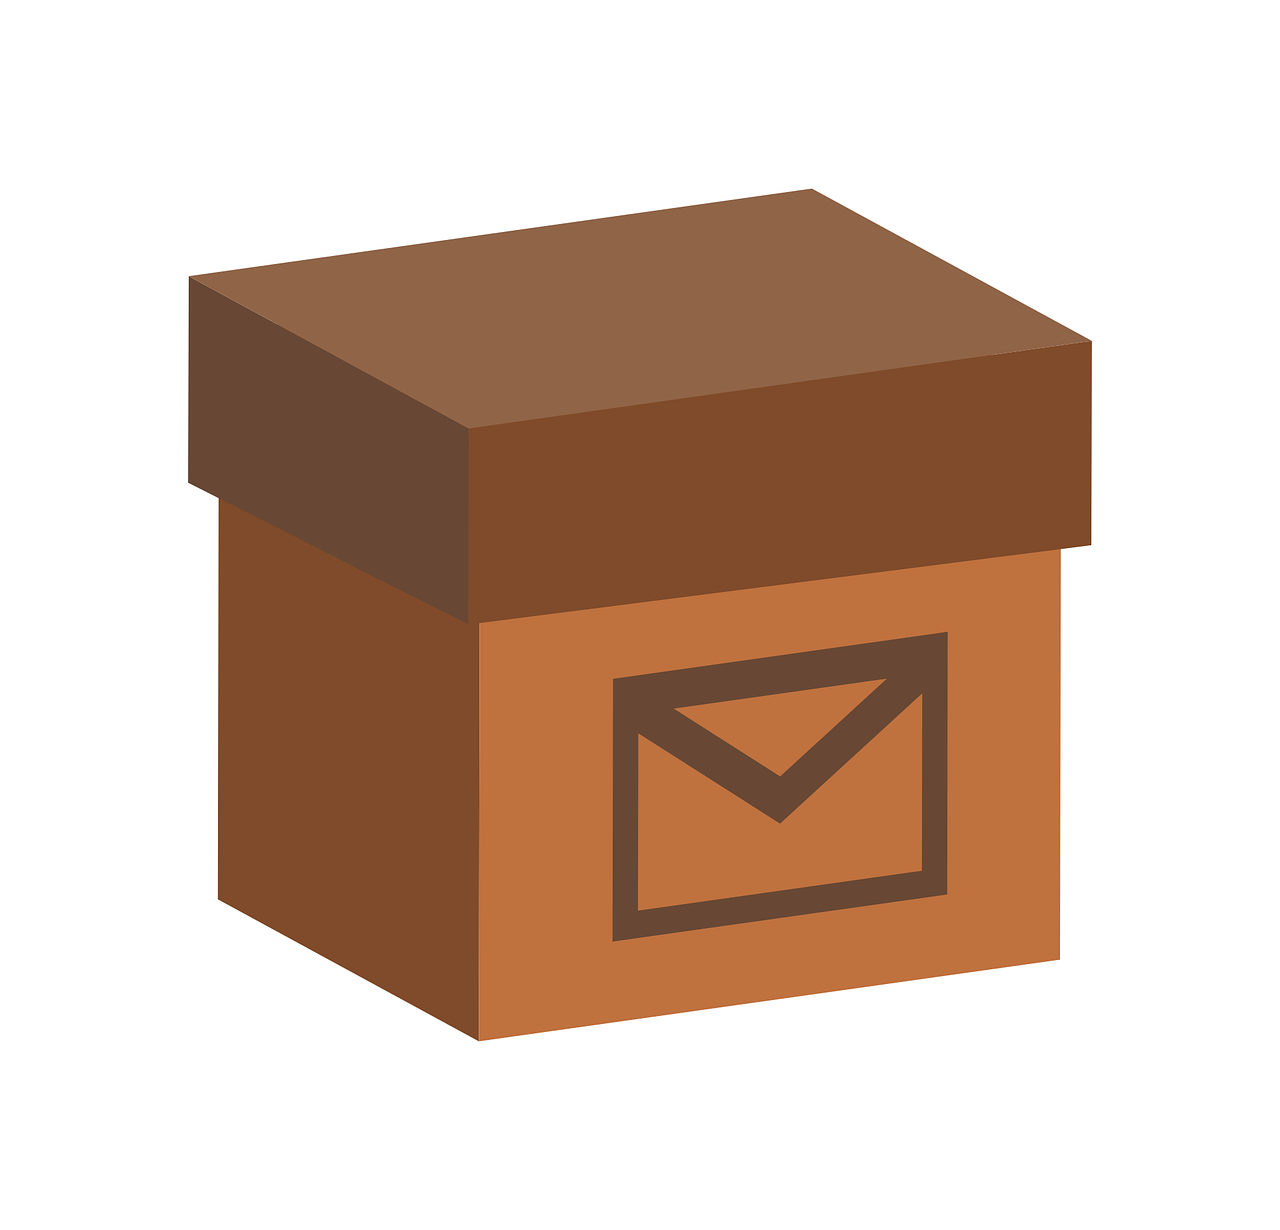 a box with a mail inside of it, concept art, postminimalism, style of emoji, brown:-2, japanese collection product, pictogram